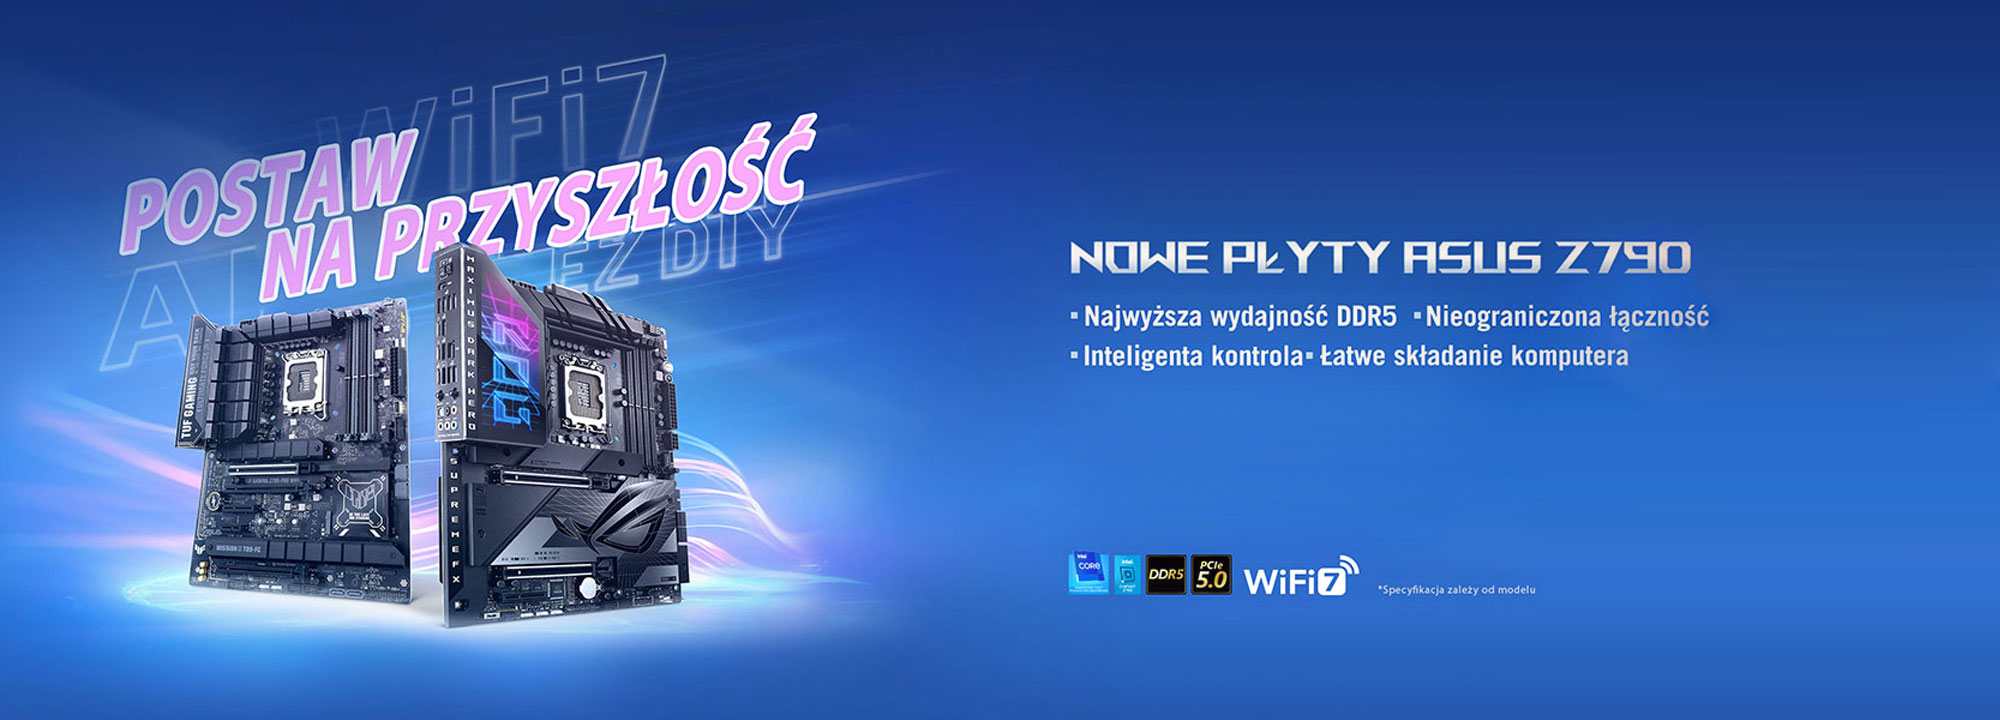 FORGE YOUR FUTURE - NEW ASUS Z790, with DDR5 Ultimate Performance, Unbounded Coneectivity, Intelligent Control and Easy PC DIY.